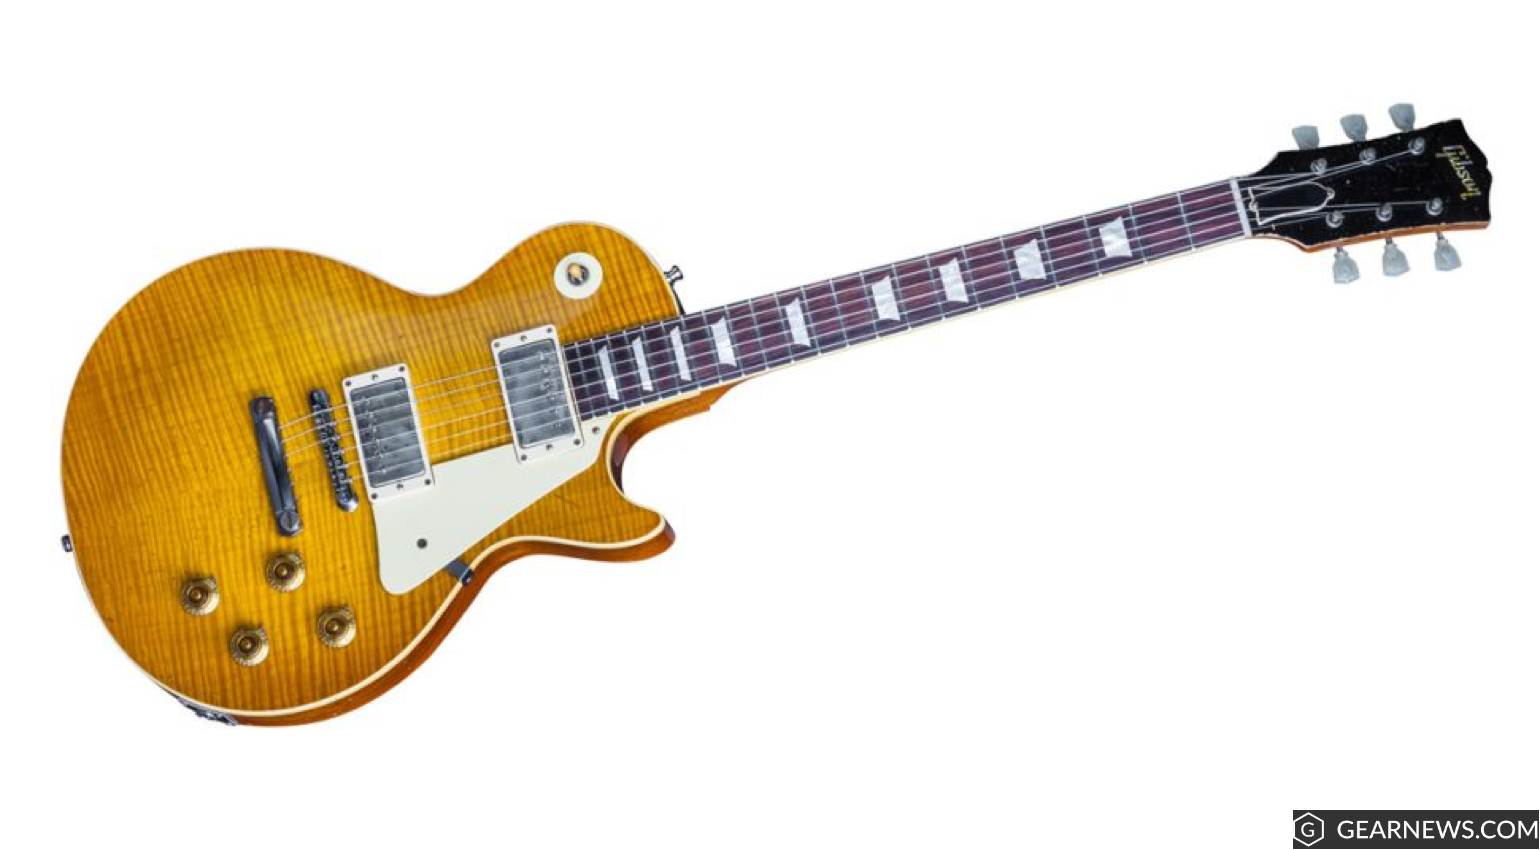 Image - Gibson Les Paul.png |